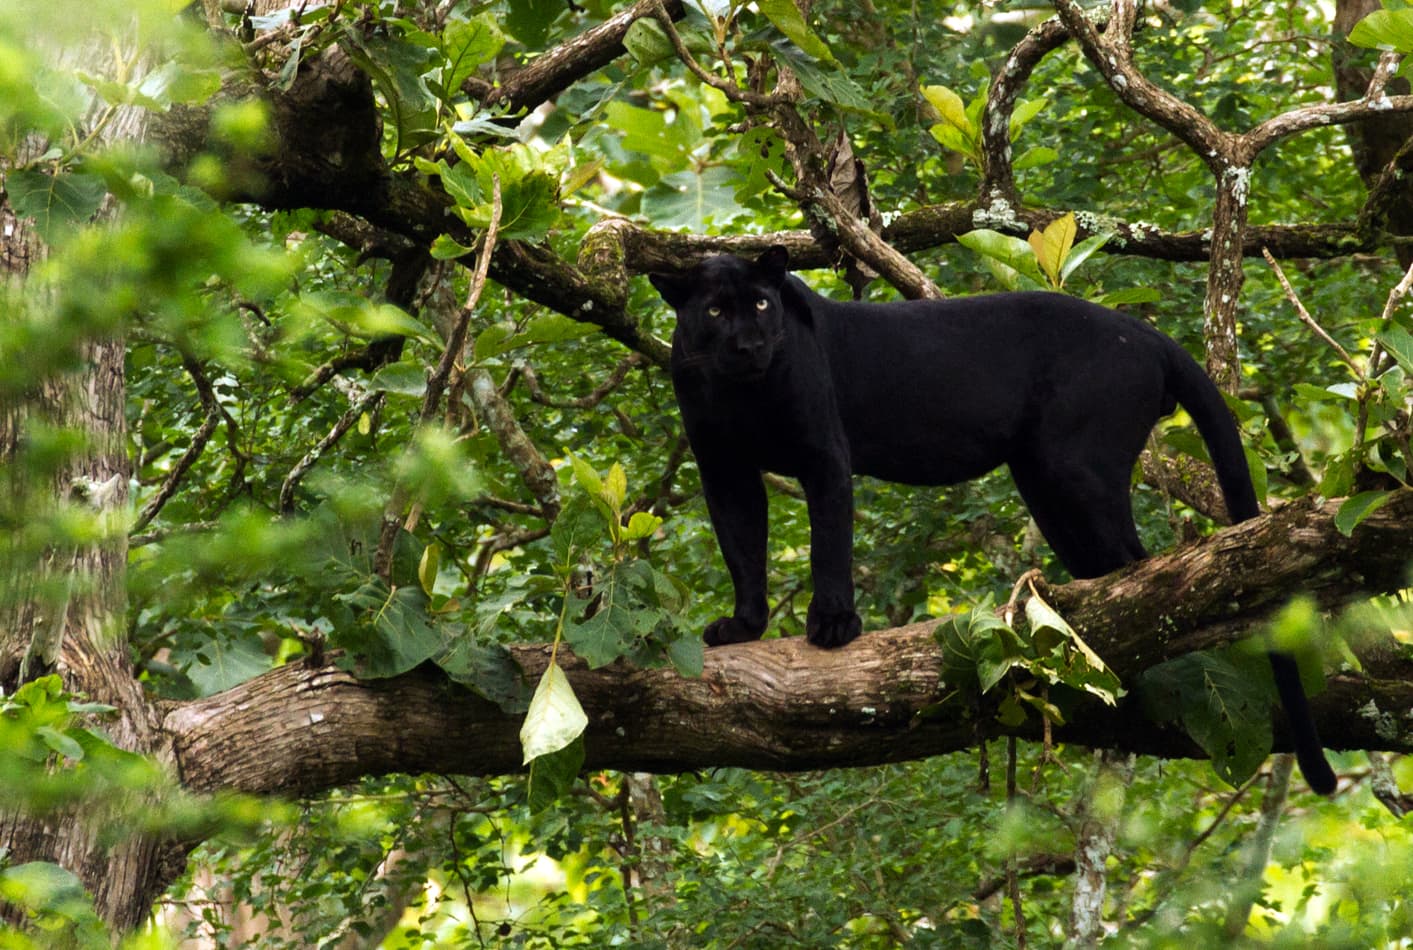 The Black Panther: In Search of Saya at Nagarhole National Park